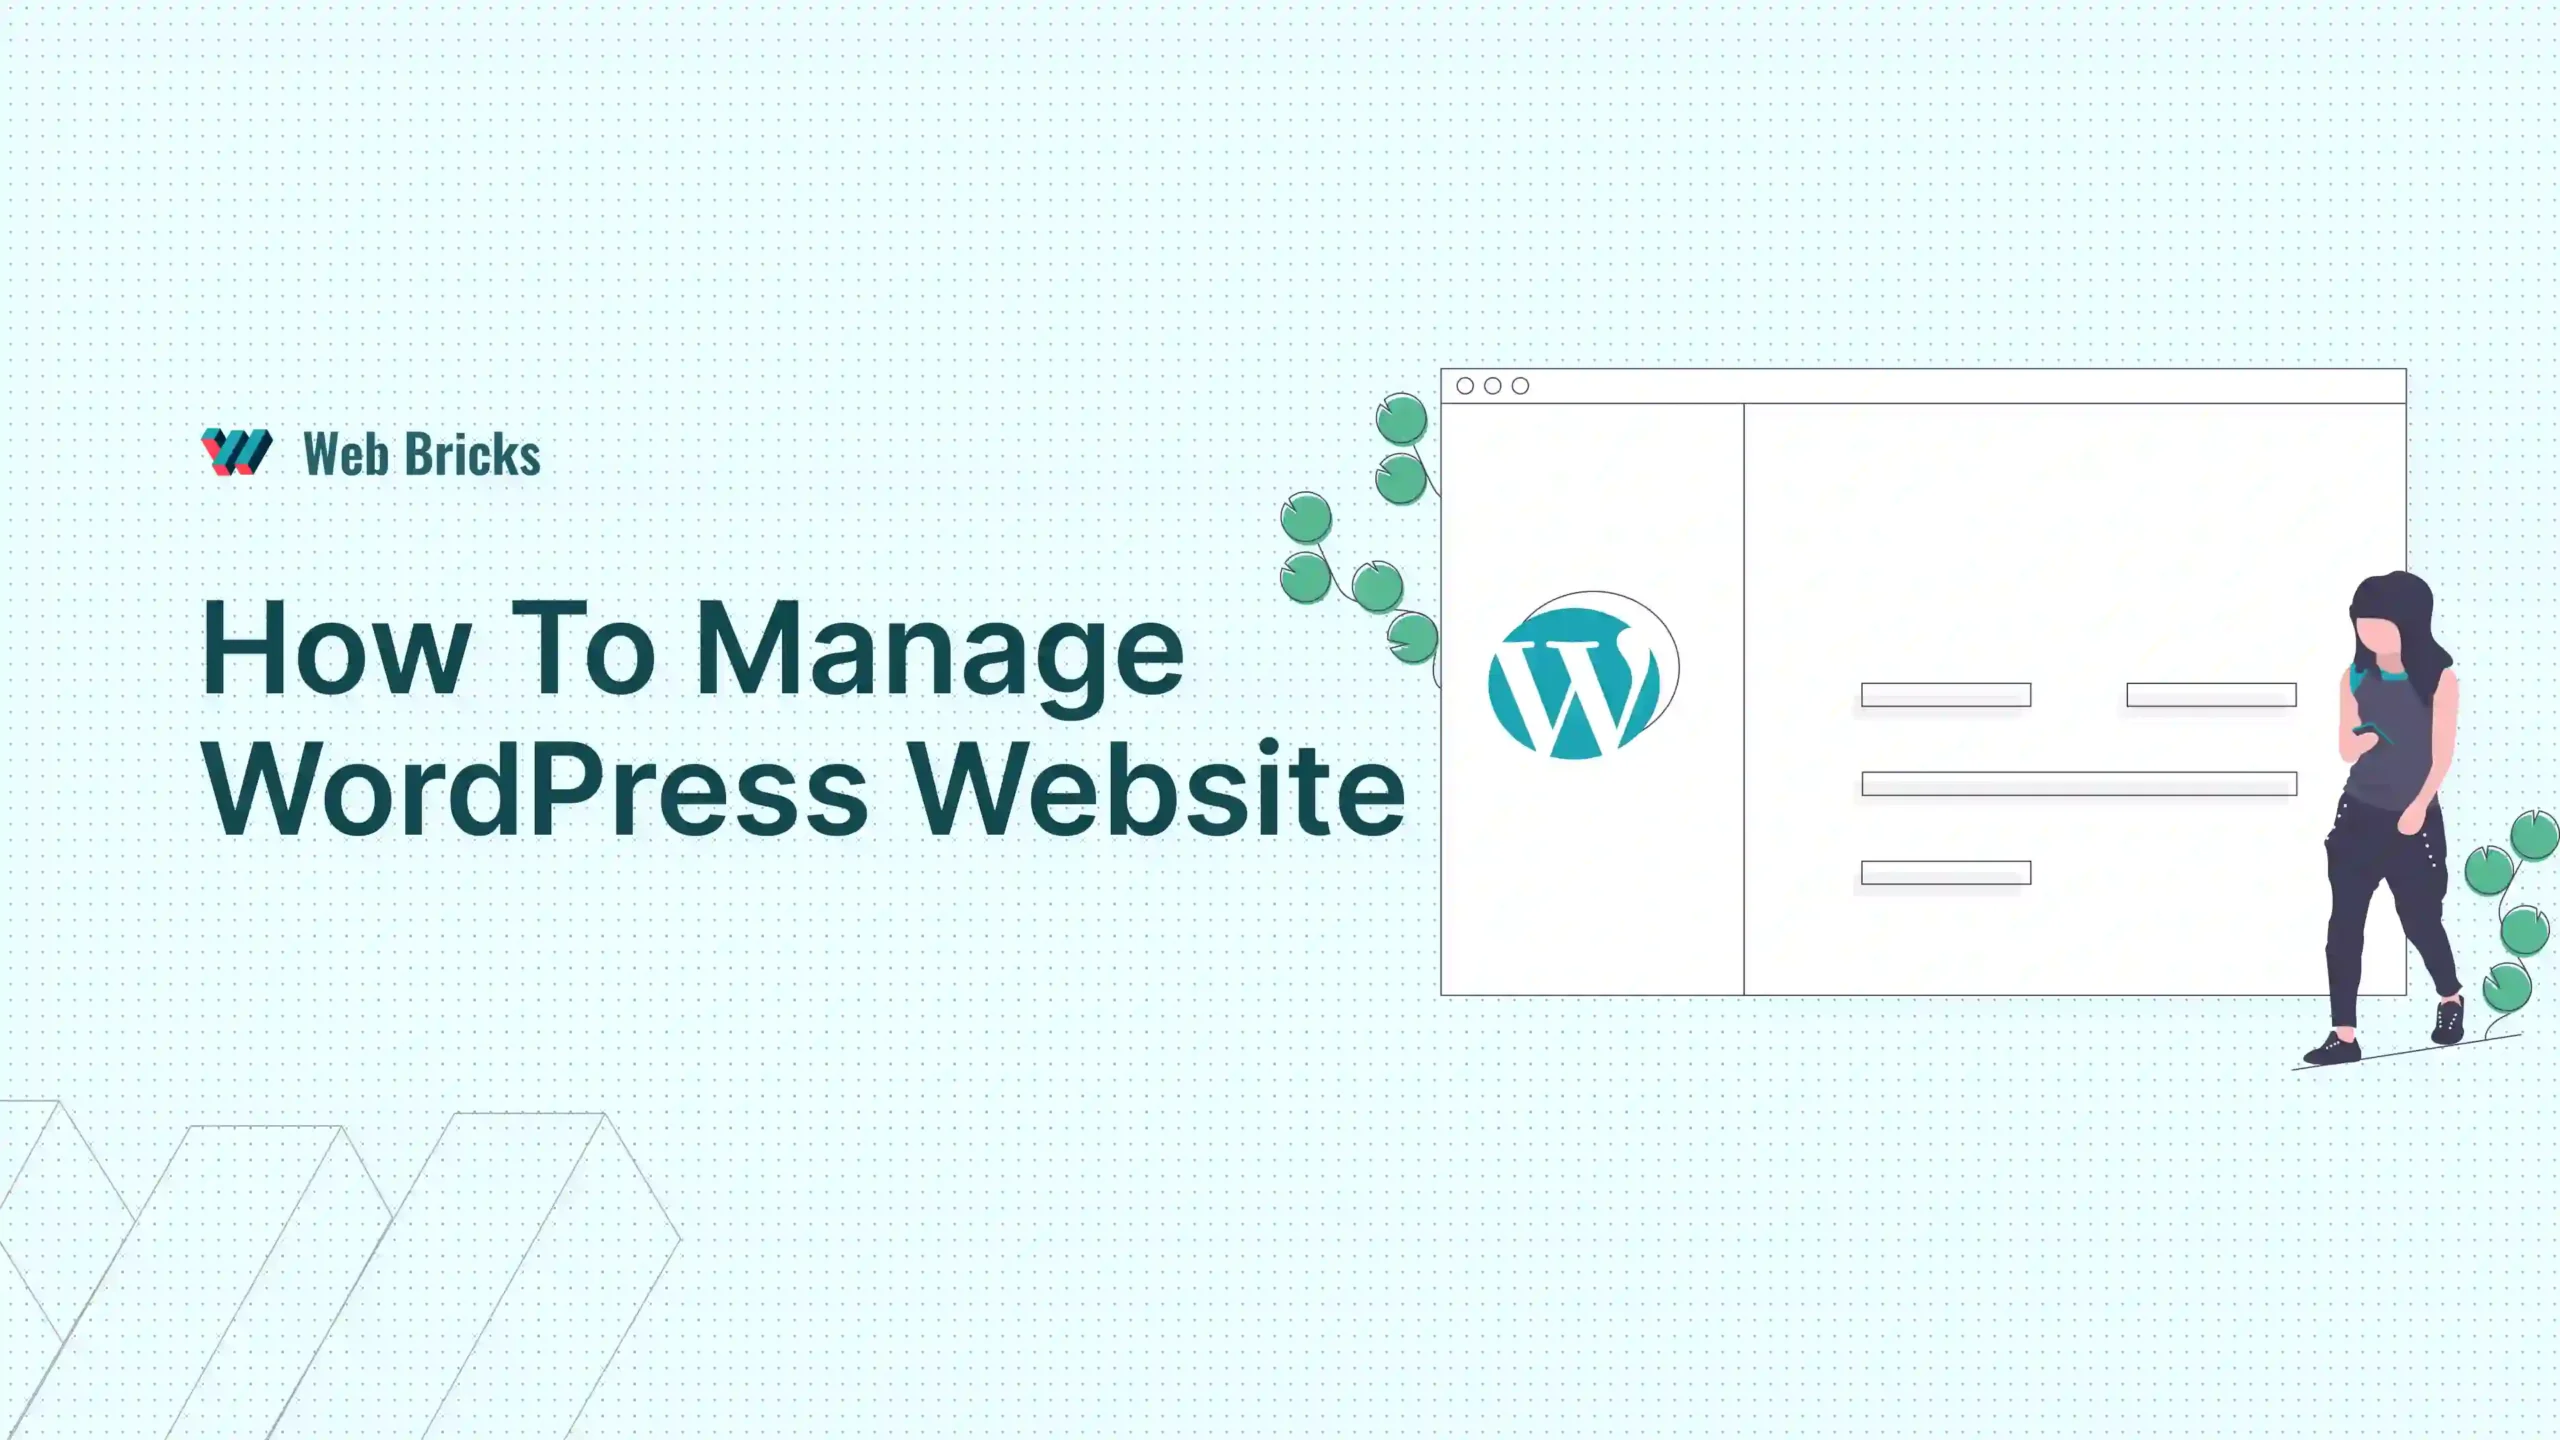 How To Manage WordPress Website For Business?